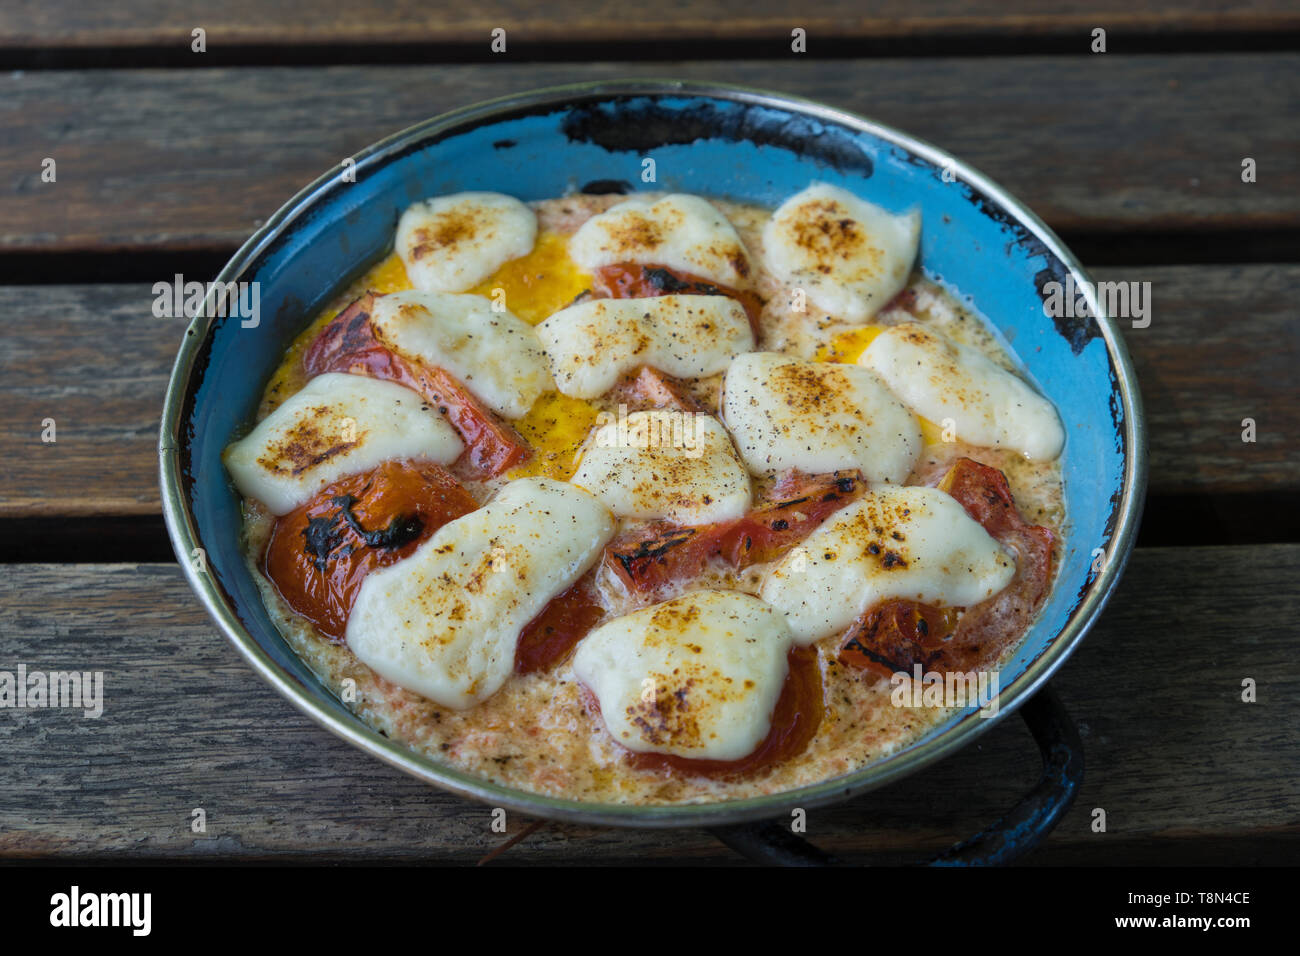 Still life of cooked eggs tomatoes and cheese in metal dish Stock Photo